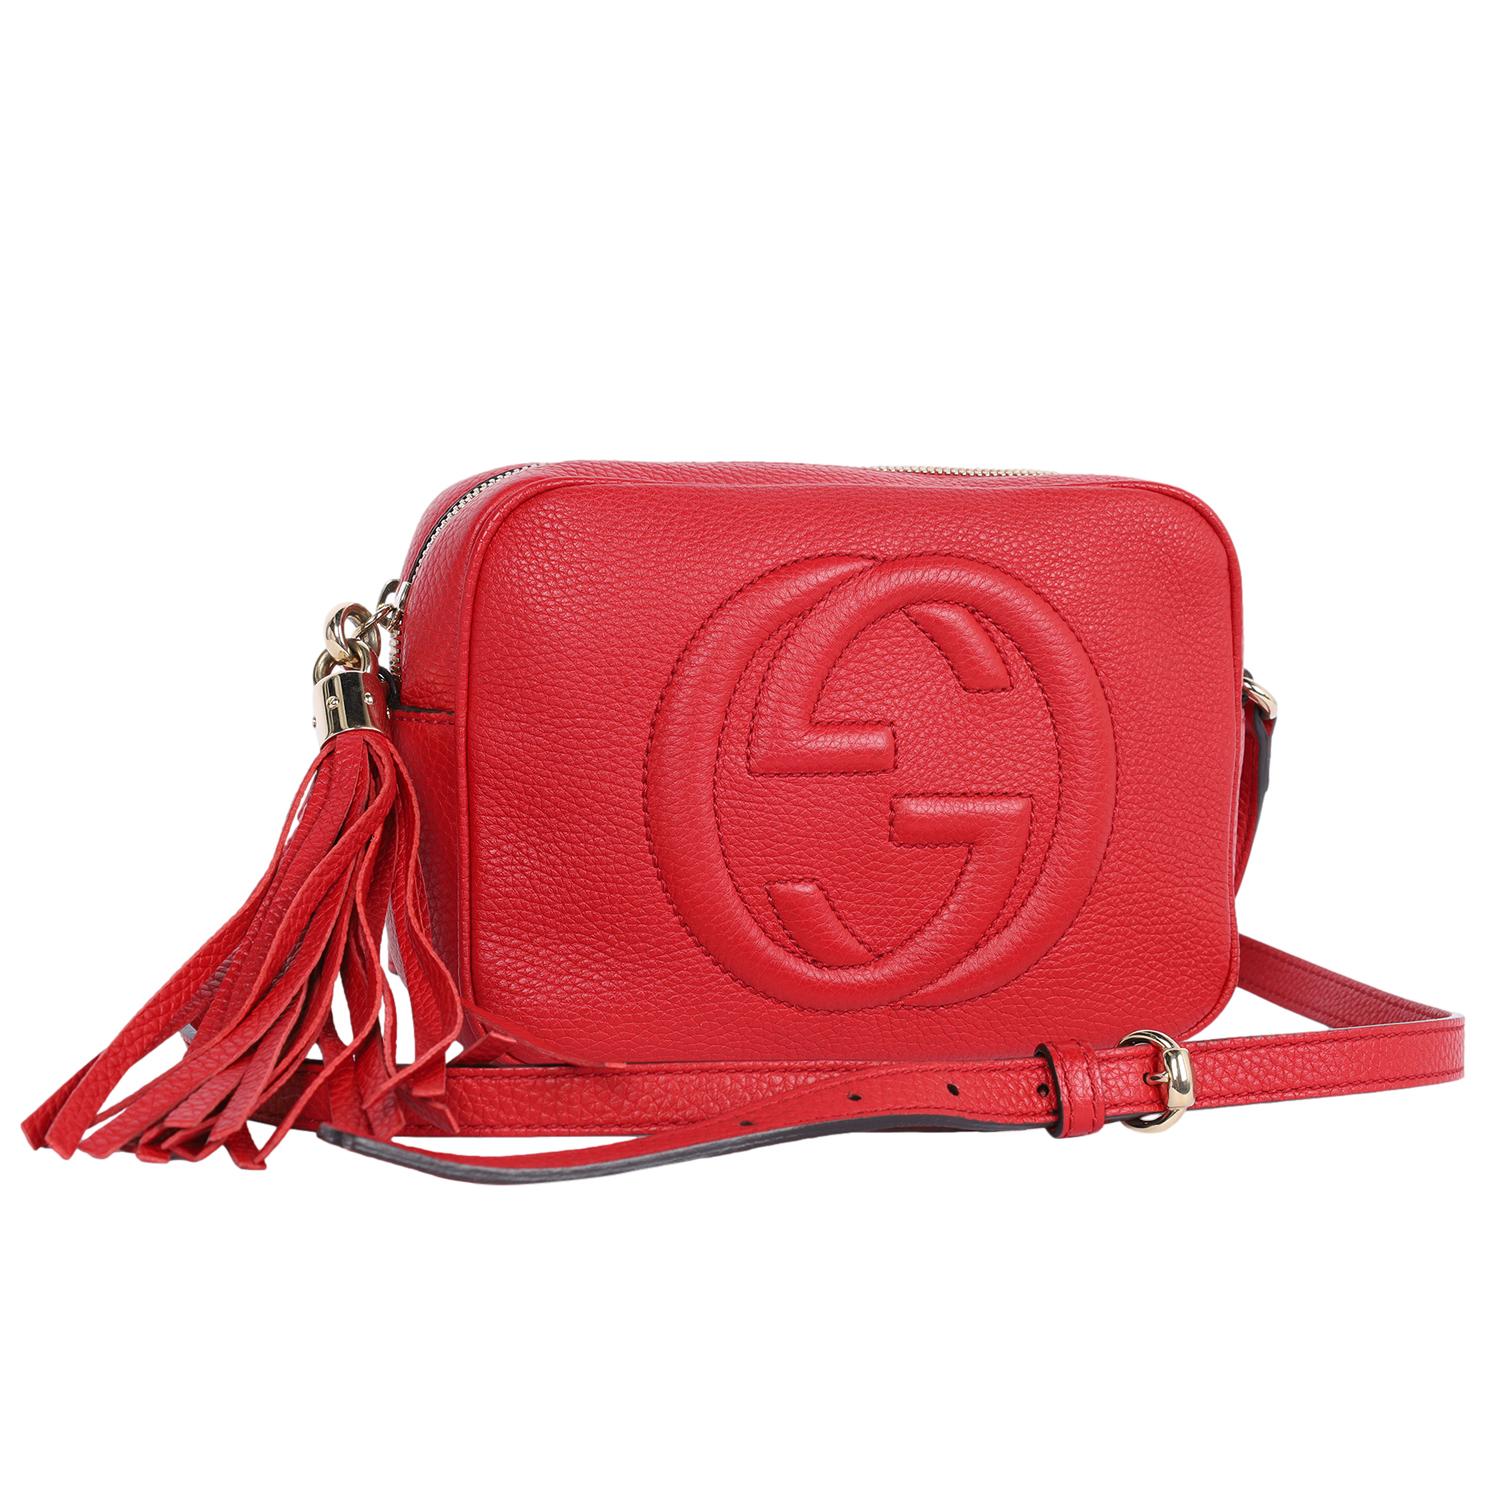 Gucci GG Red Soho Disco Leather Cross Body Bag In Excellent Condition For Sale In Salt Lake Cty, UT